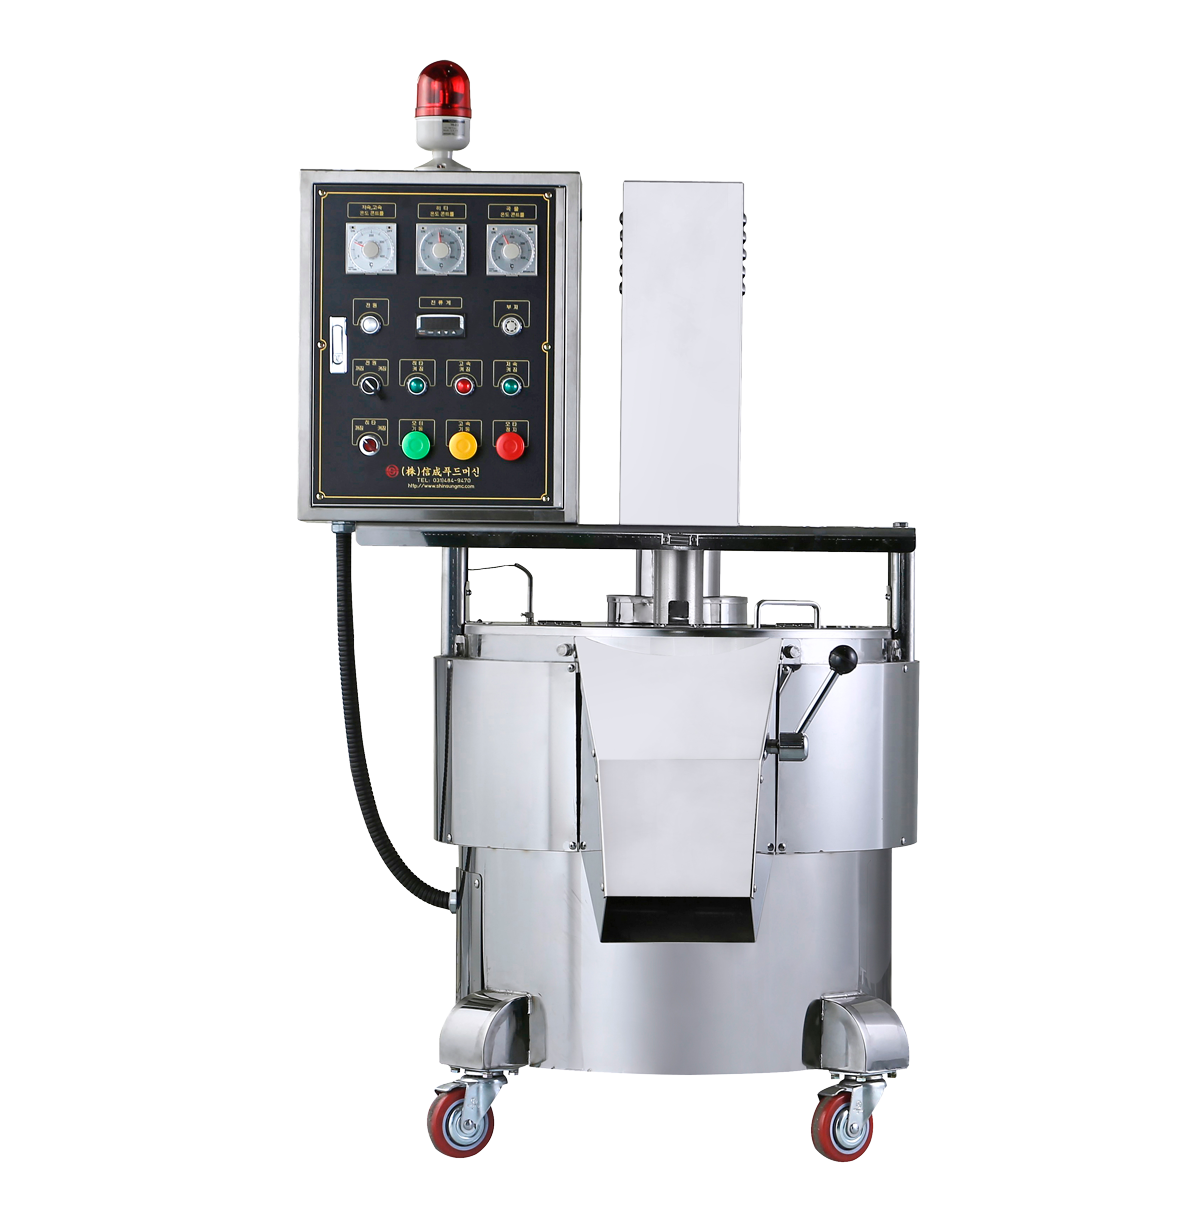 SSH-010 Automatic Electric Roaster